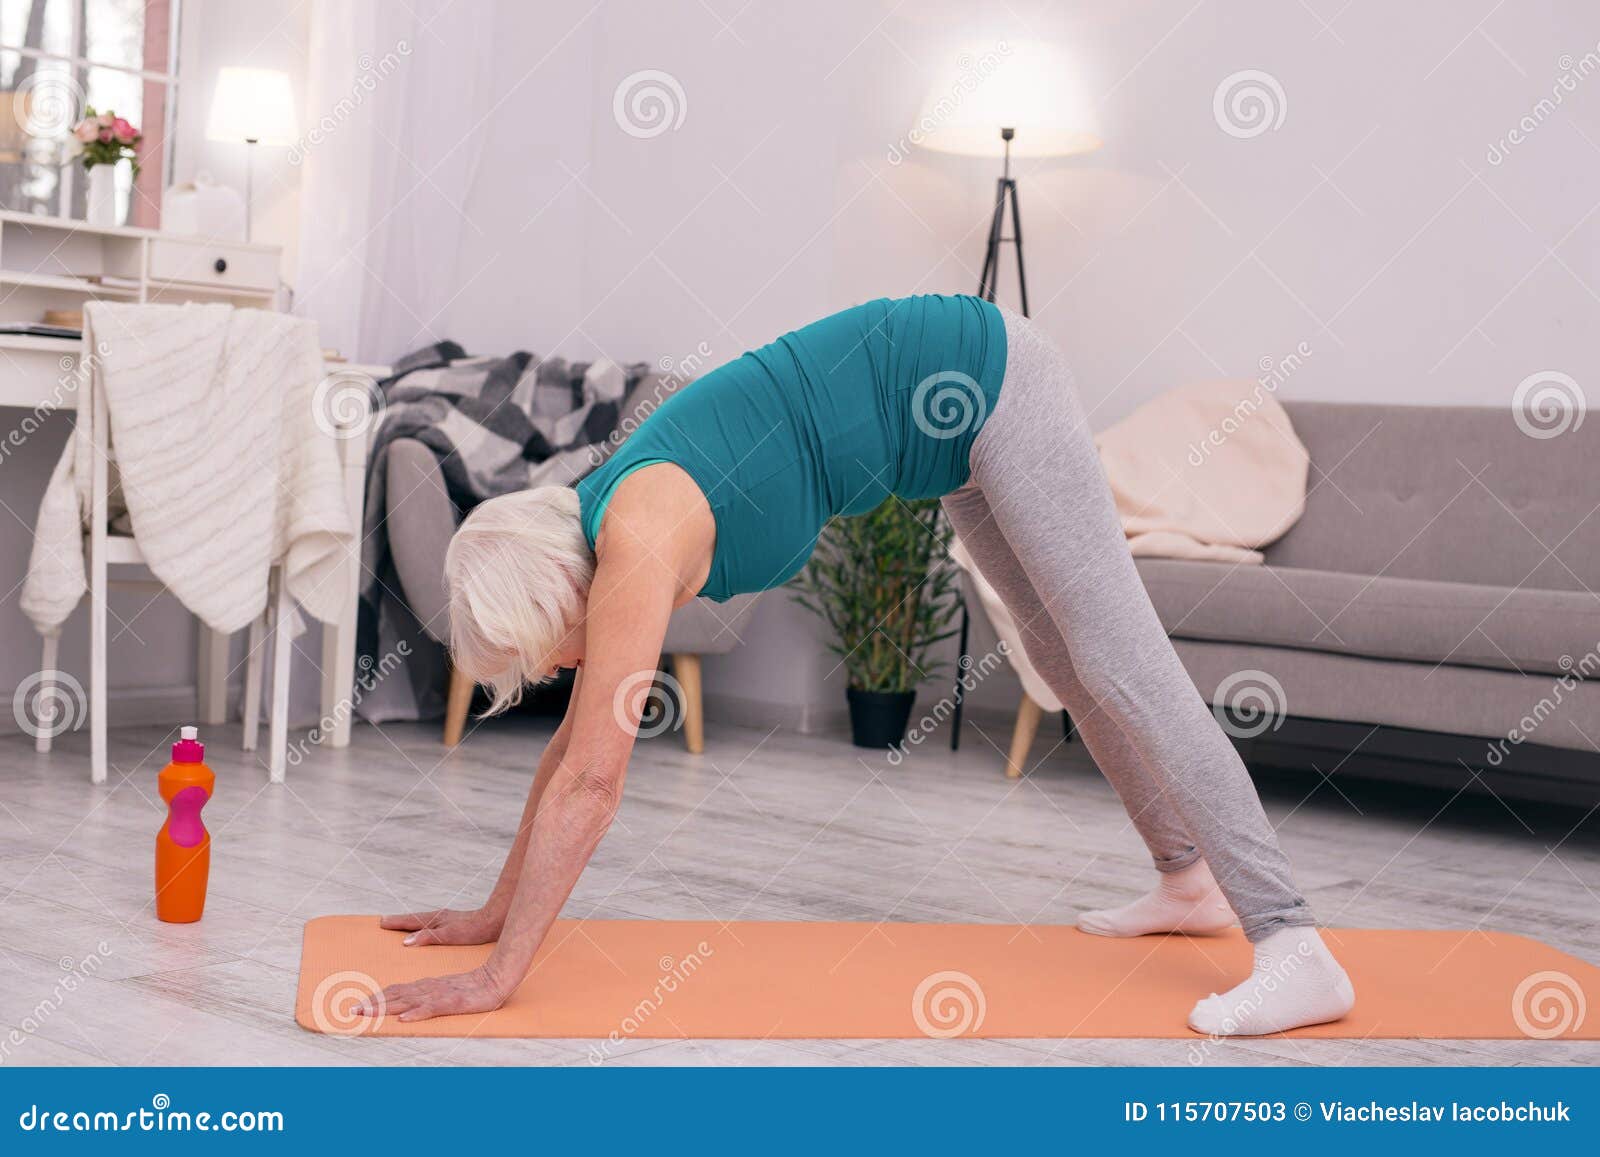 athletic young woman standing in downward-facing dog asana